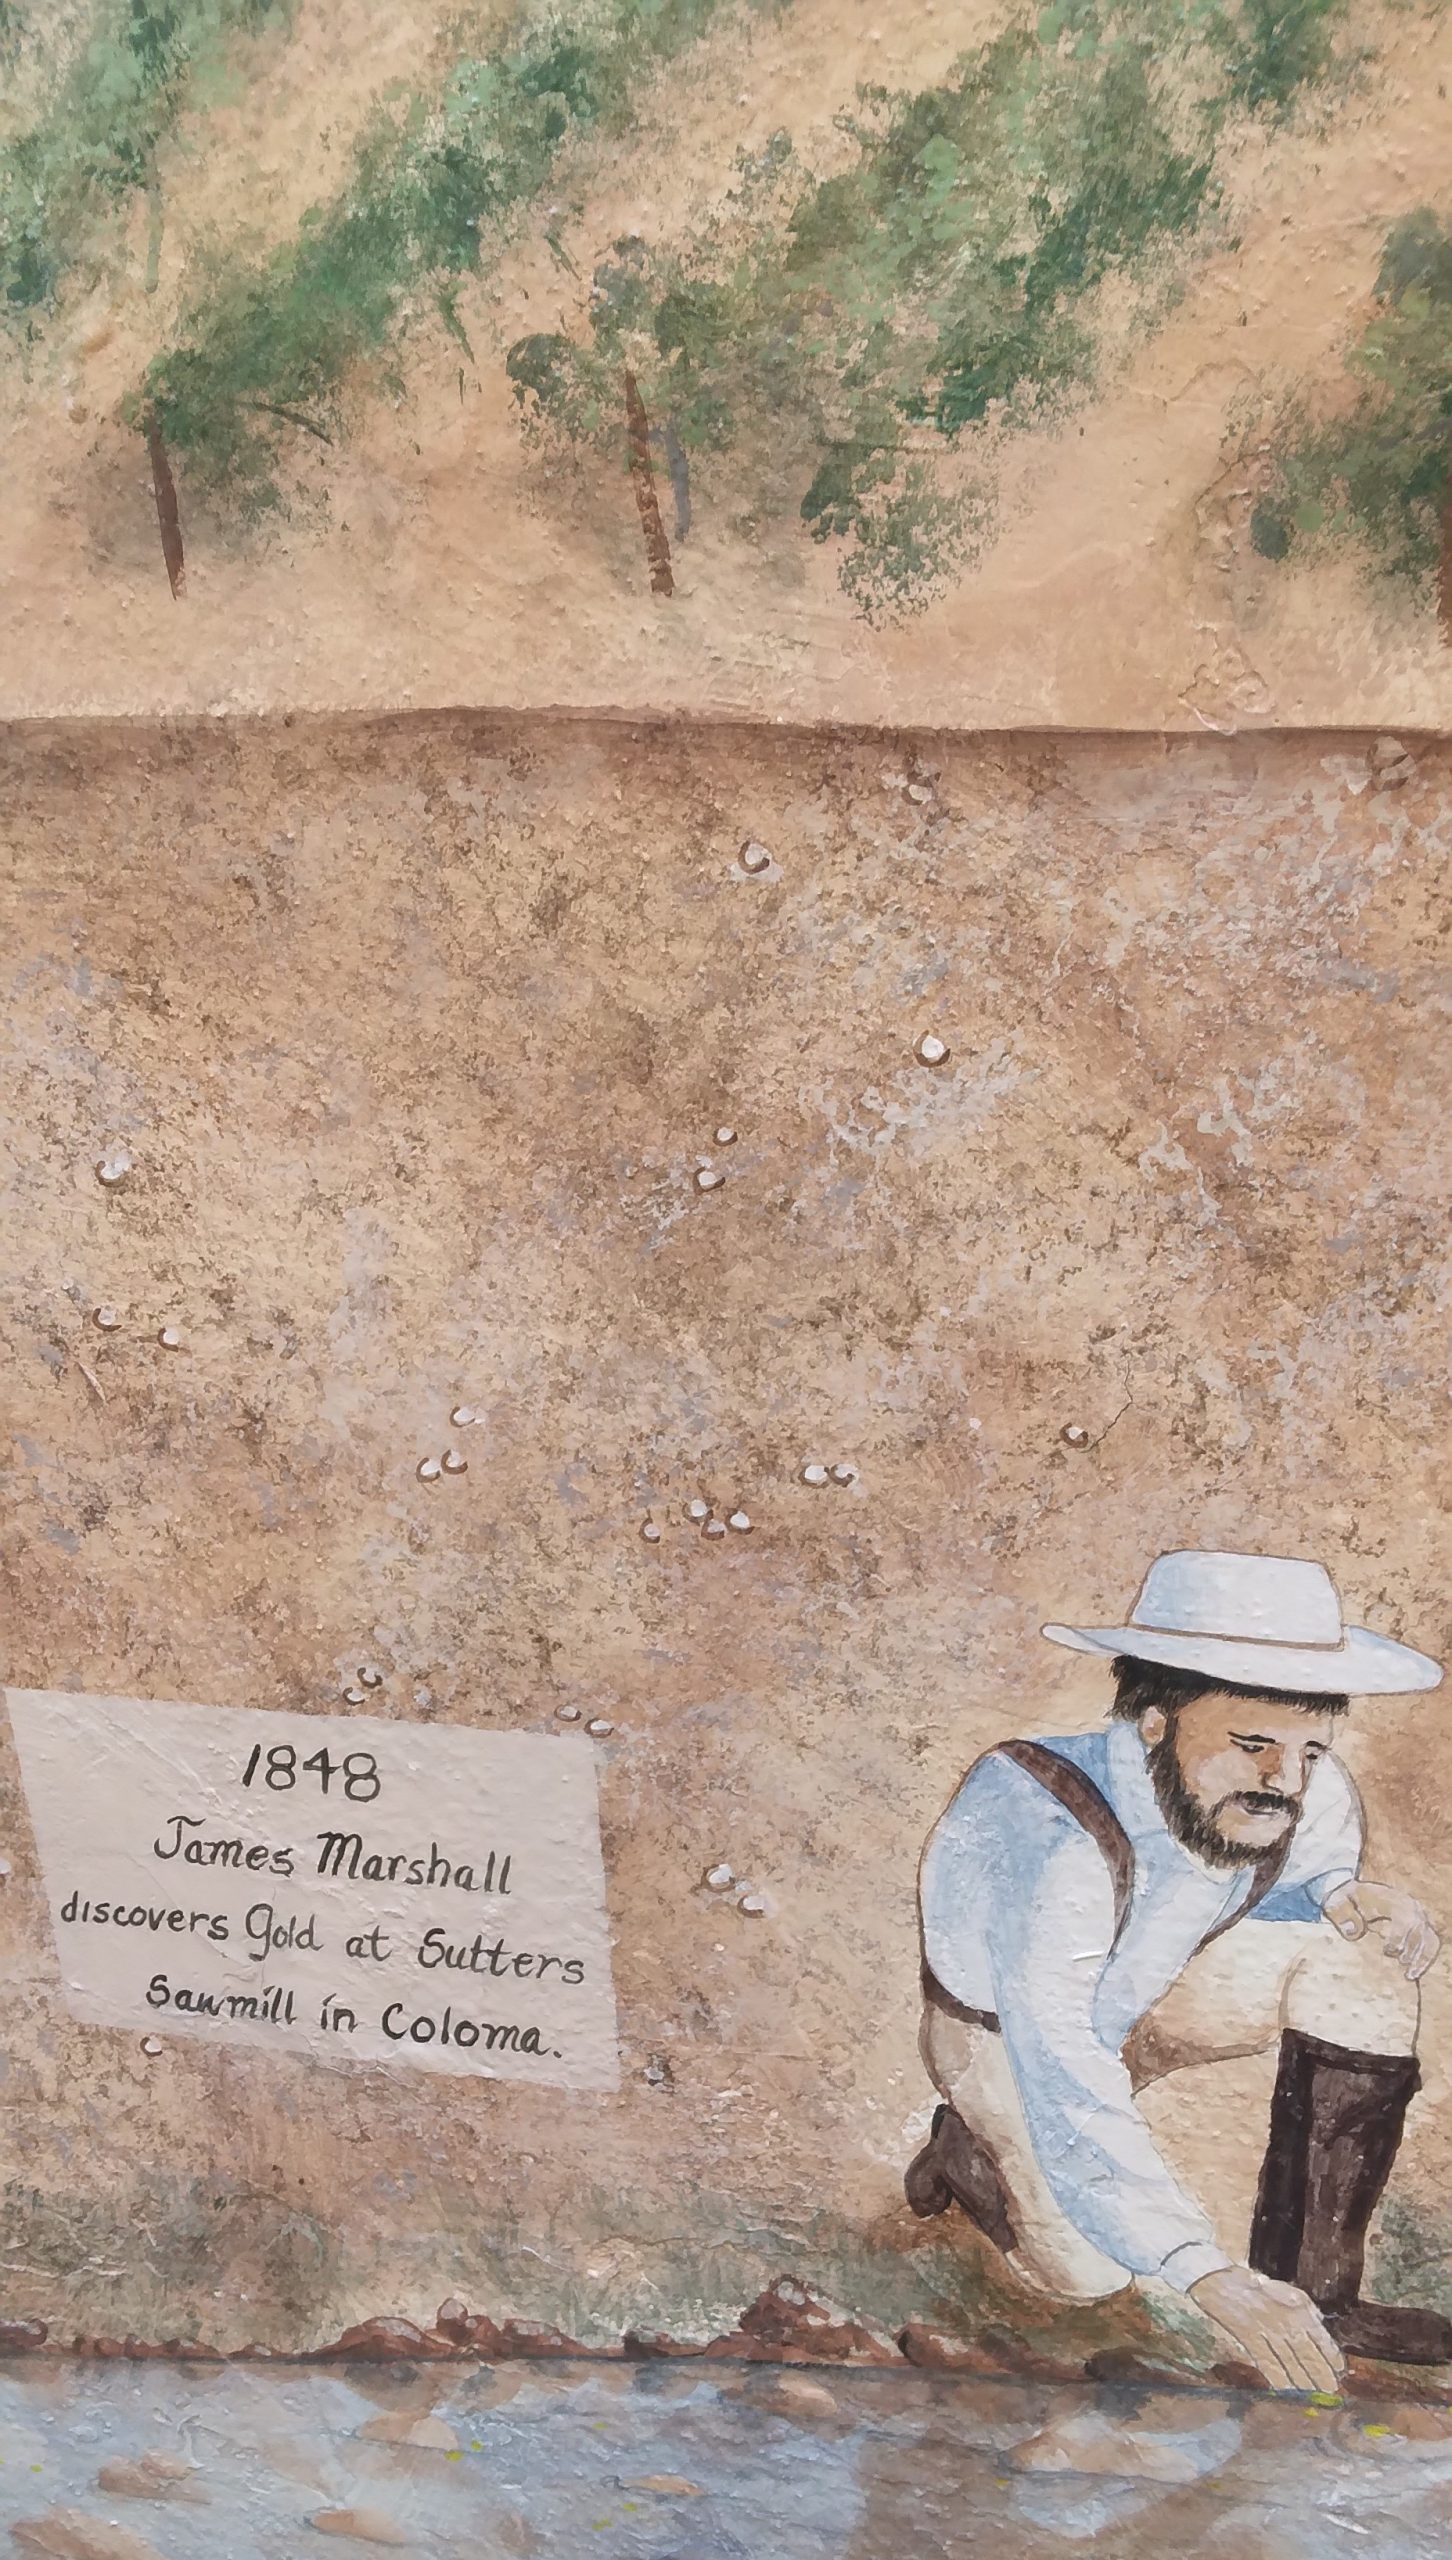 Wall with a painting of kneeling man and text that reads, "1848 James Marshall discovers Gold at Gutters..."